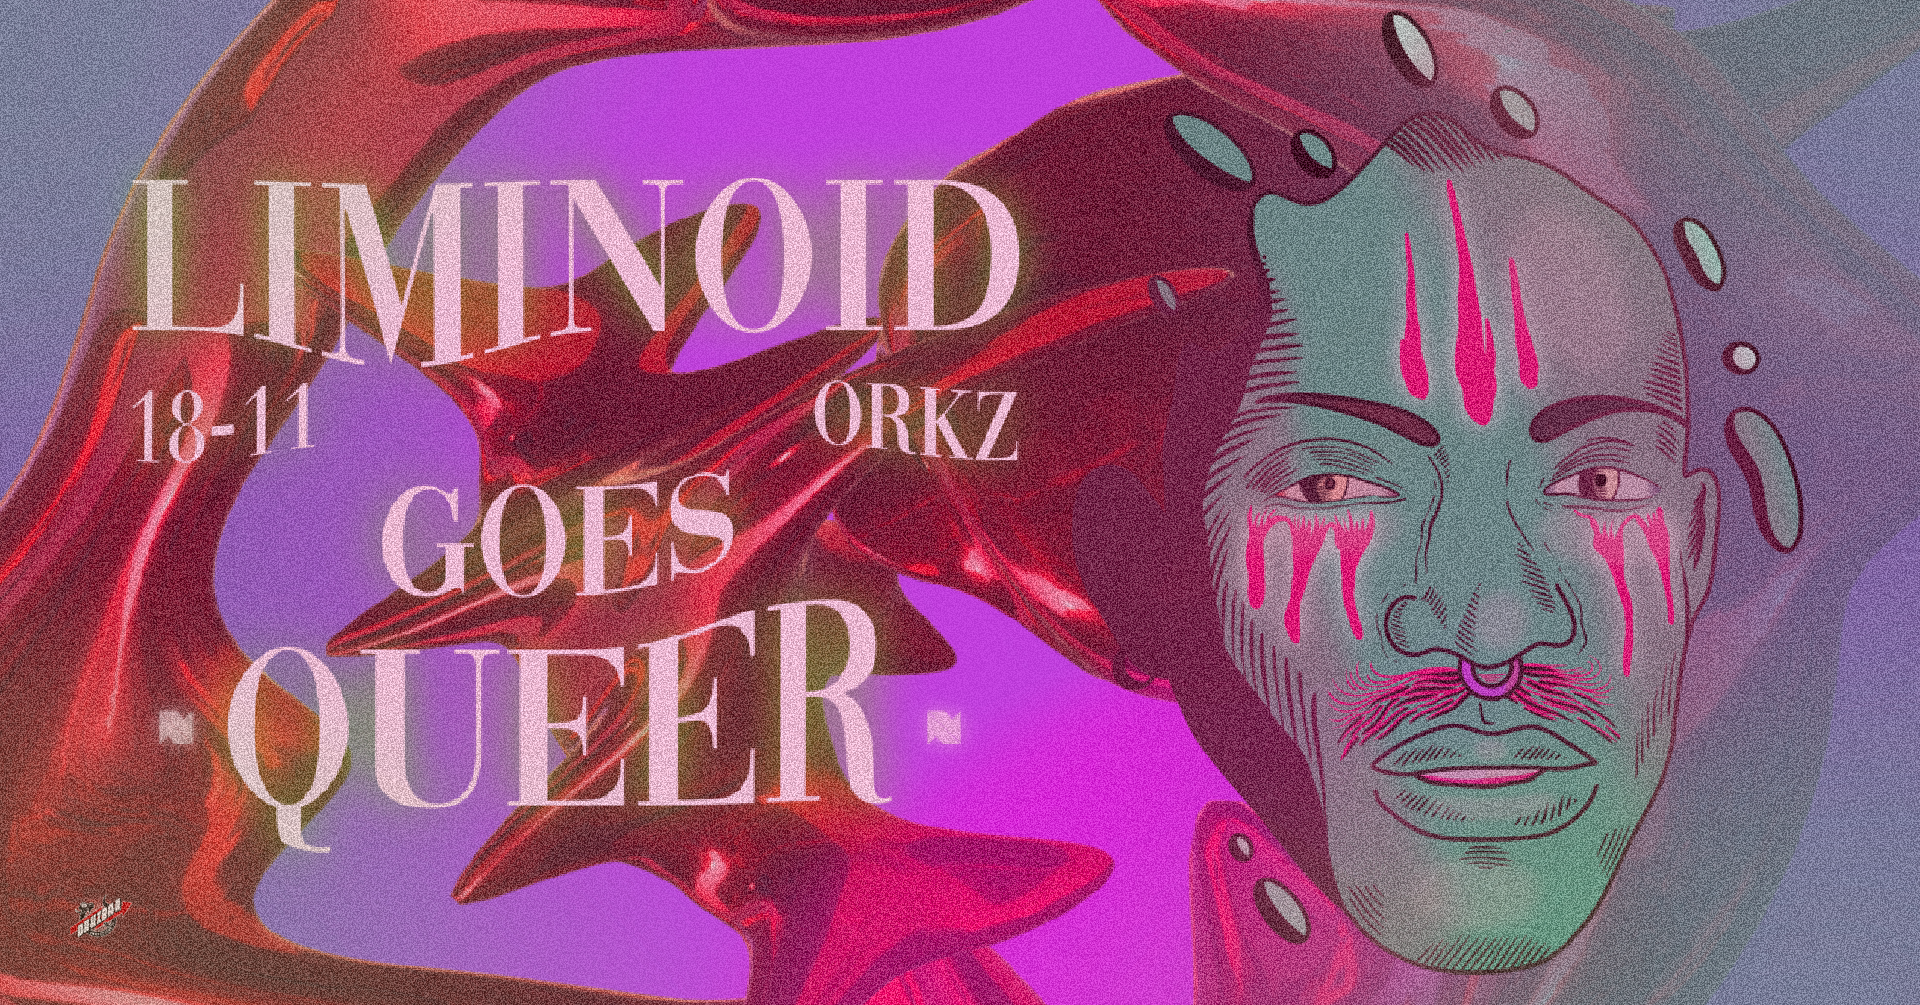 LIMINOID goes QUEER vol. 2 - フライヤー表